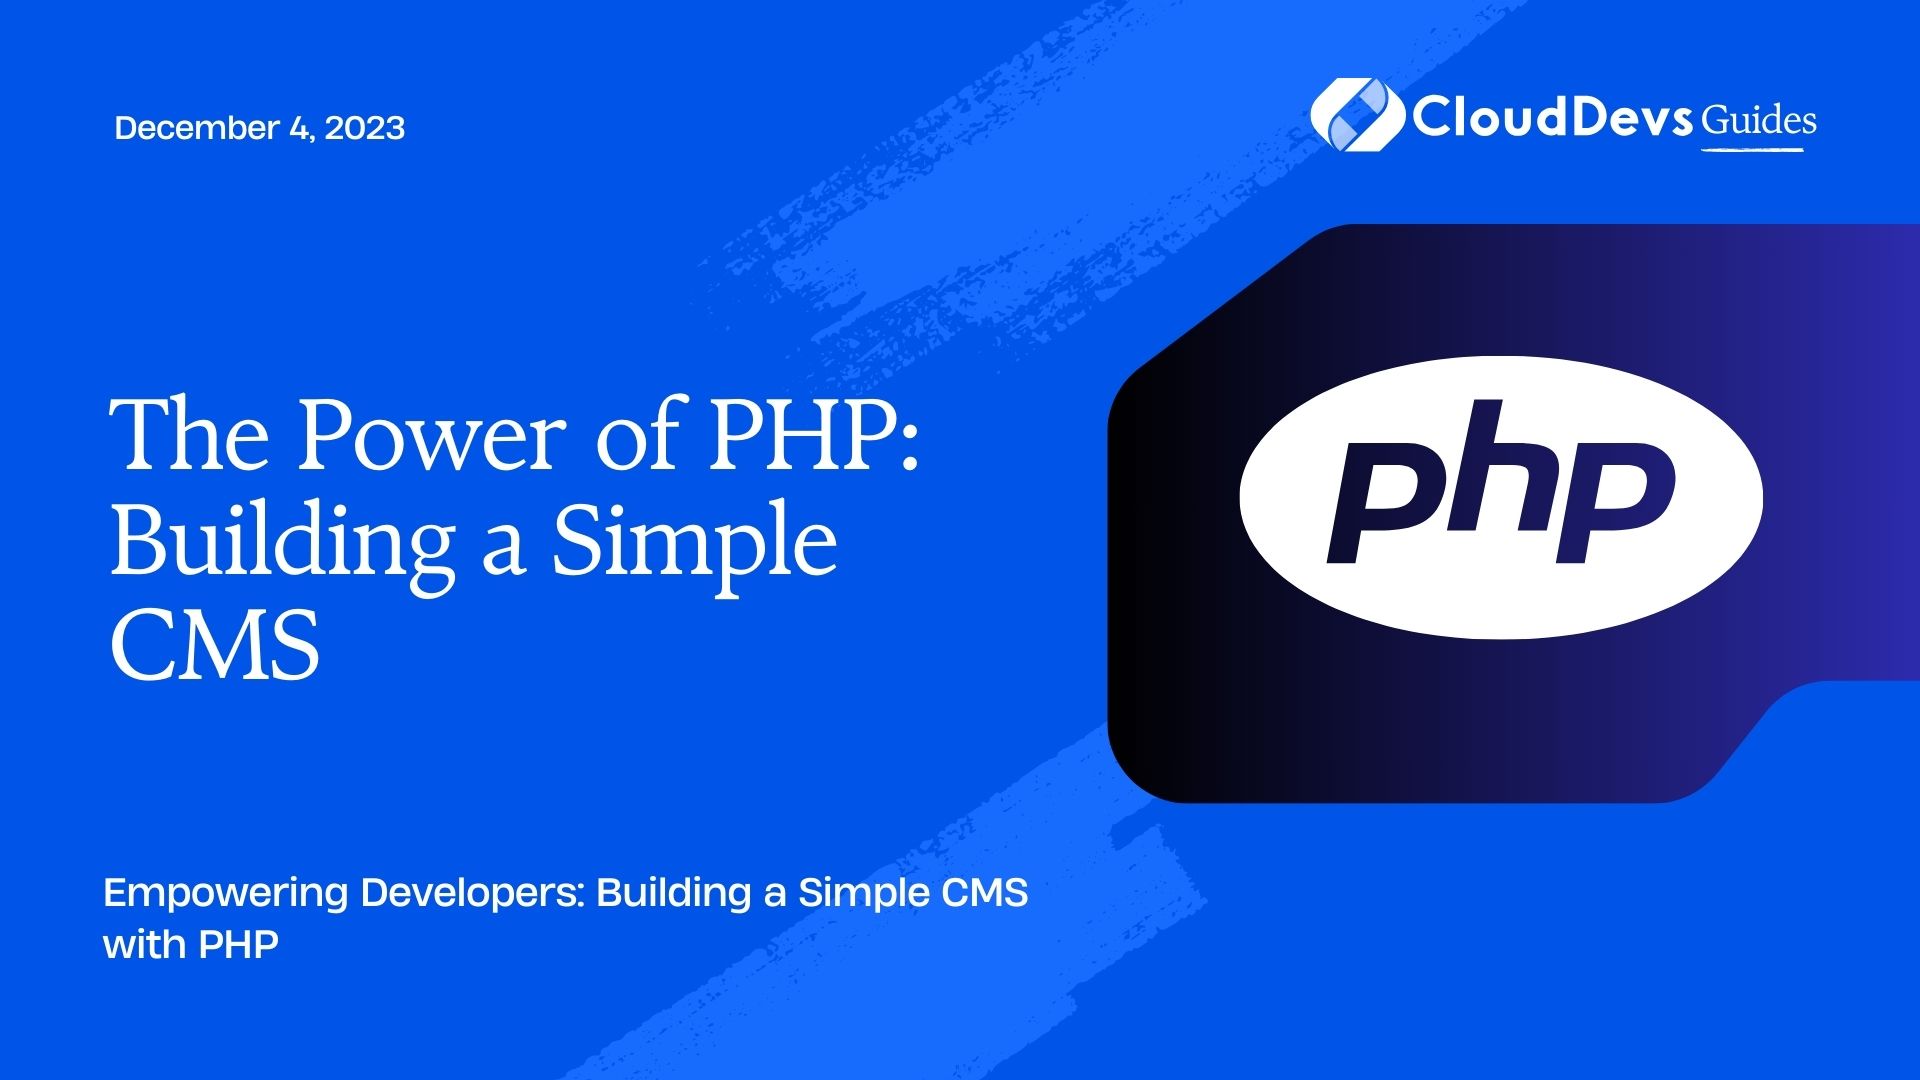 The Power of PHP: Building a Simple CMS